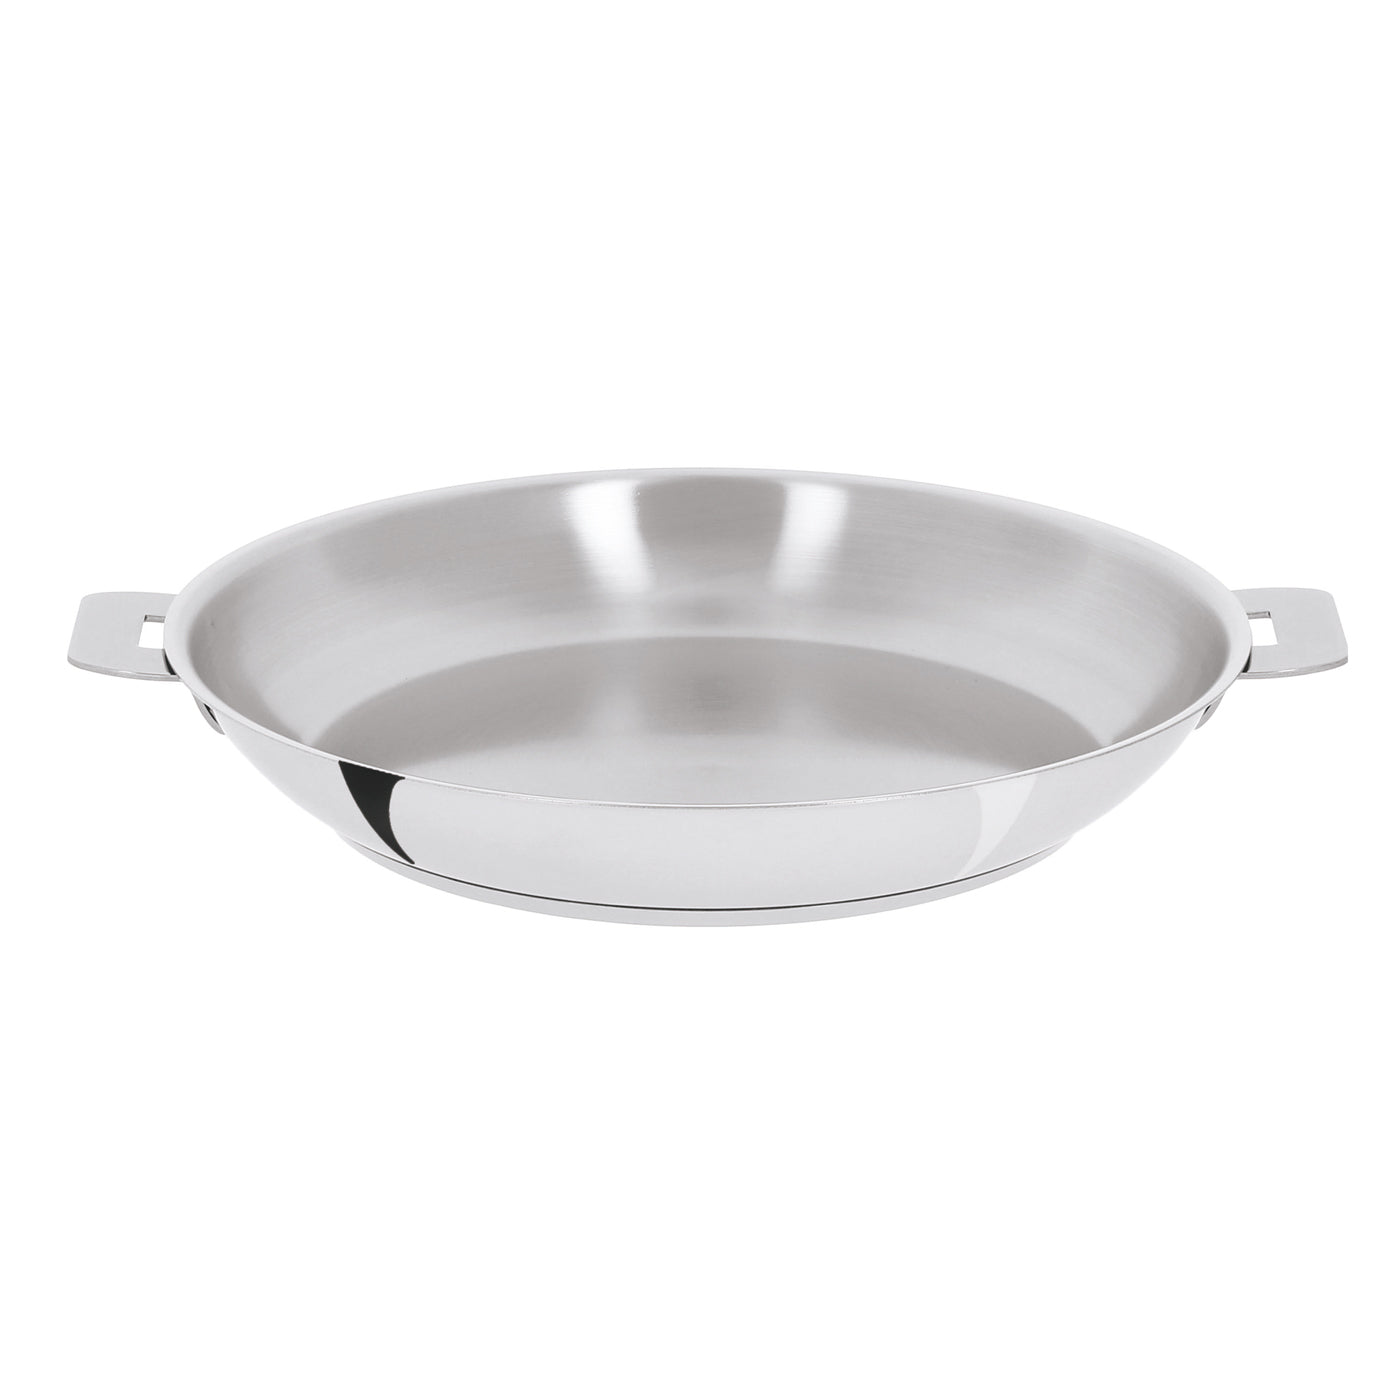 https://www.chefsarsenal.com/cdn/shop/products/cristel-mutine-removable-handle-11-stainless-steel-frying-pan-p28q_9139ea45-6a38-46c7-9617-46dc7143114b_1400x.jpg?v=1569206429